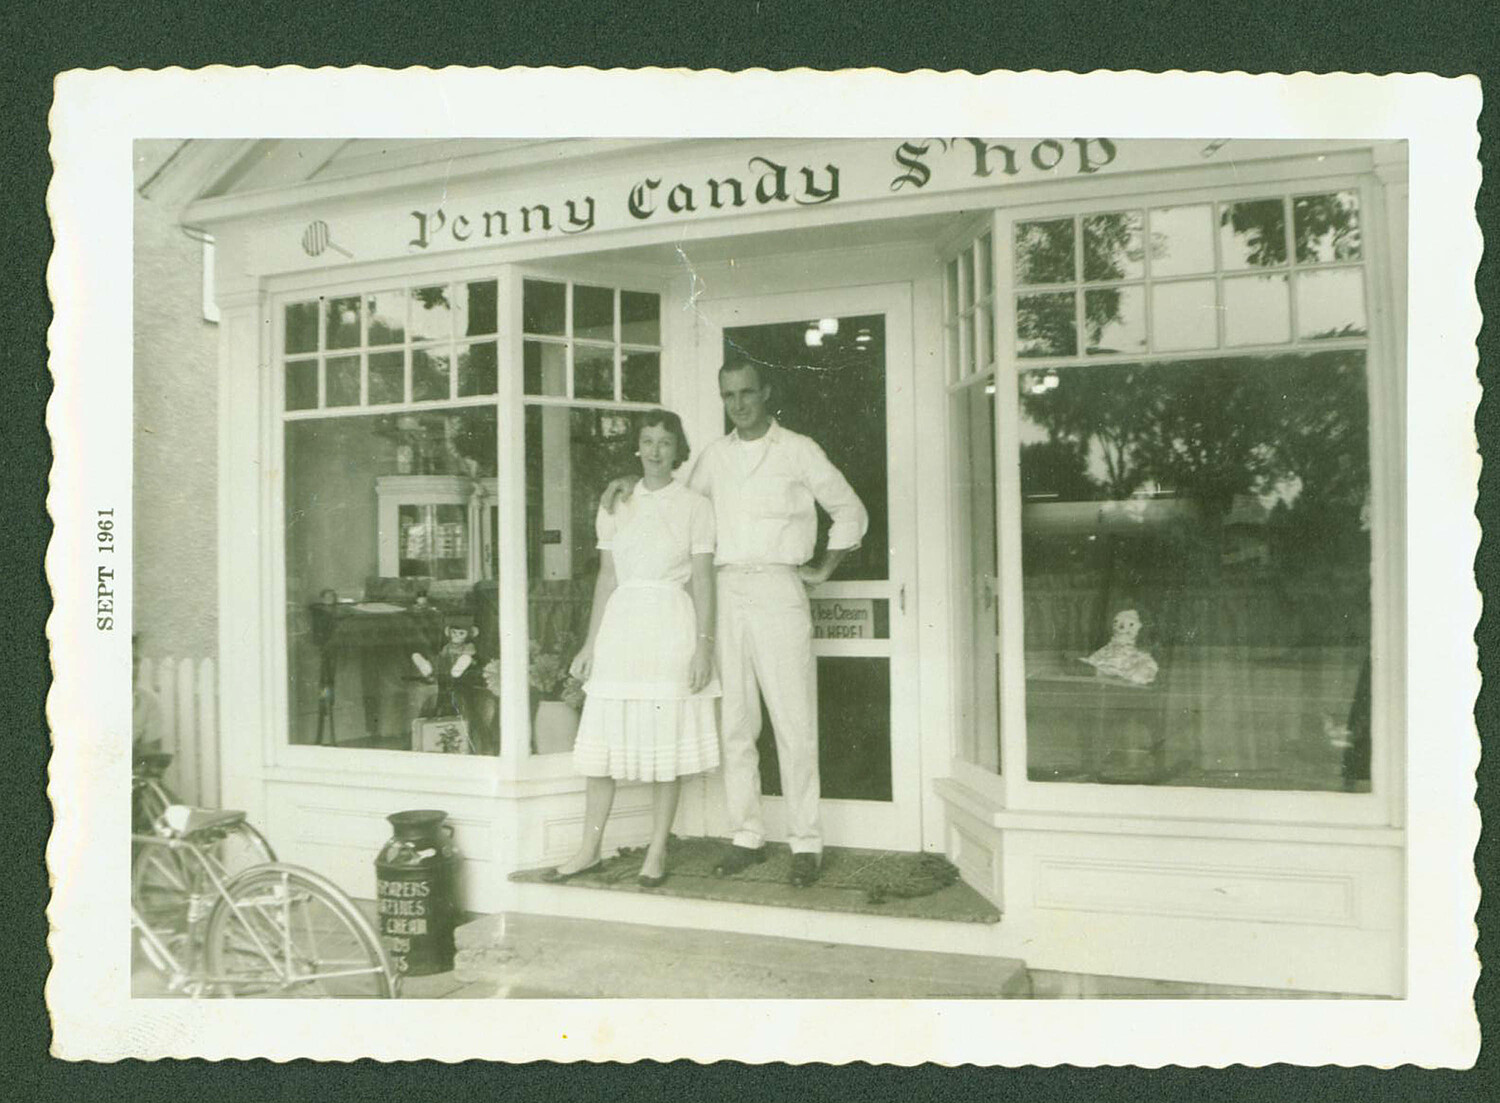 June and Harvey Morris photographed by Charlie Muller at the opening in front of the Penny Candy Shop on September 11 of 1961.